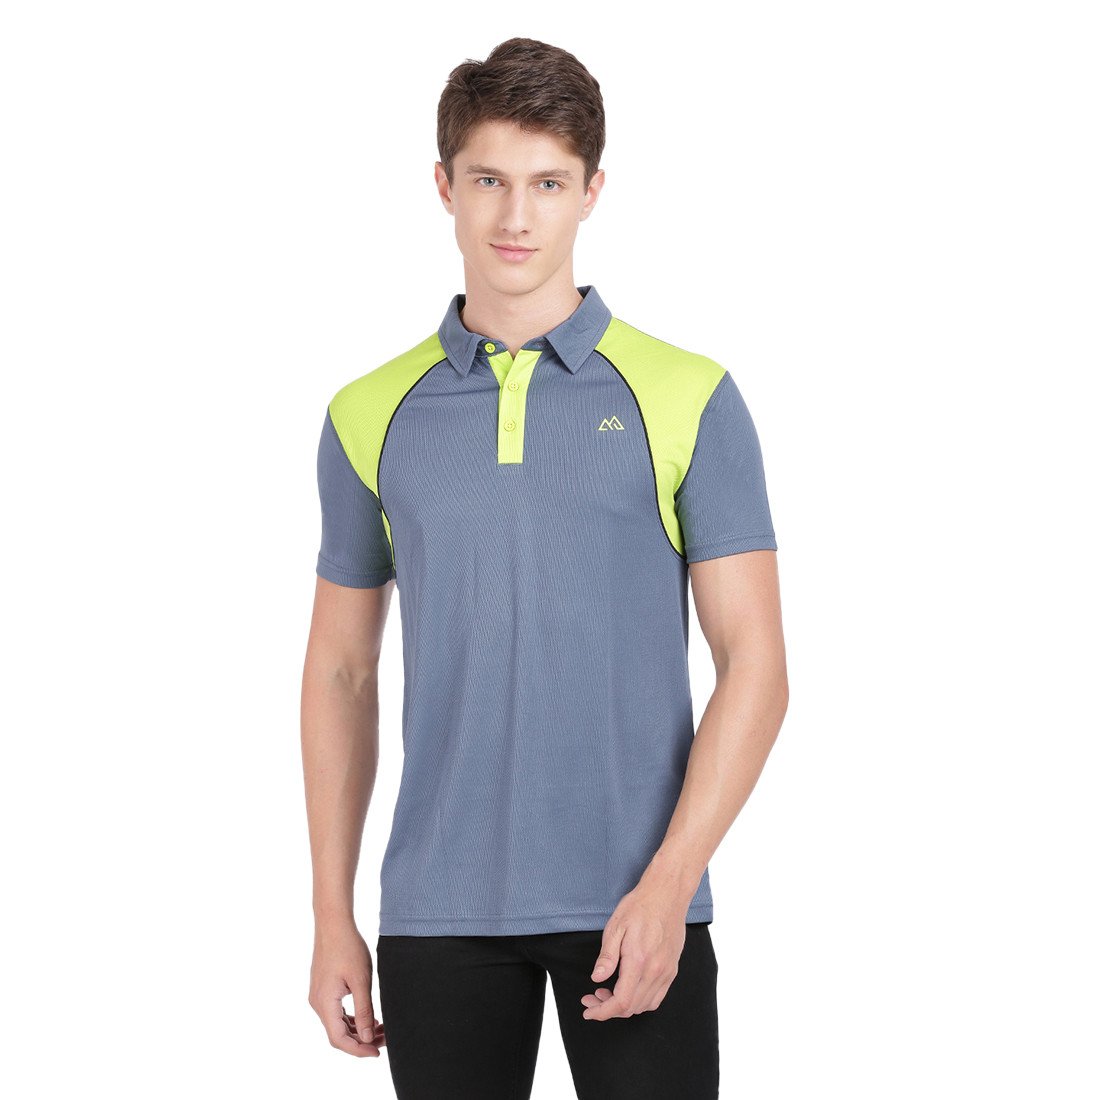 Bleualps Active Men's Polo T Shirt With Cut Panels In Fluorescent Colour | Sports T-Shirt | Workout T-Shirt